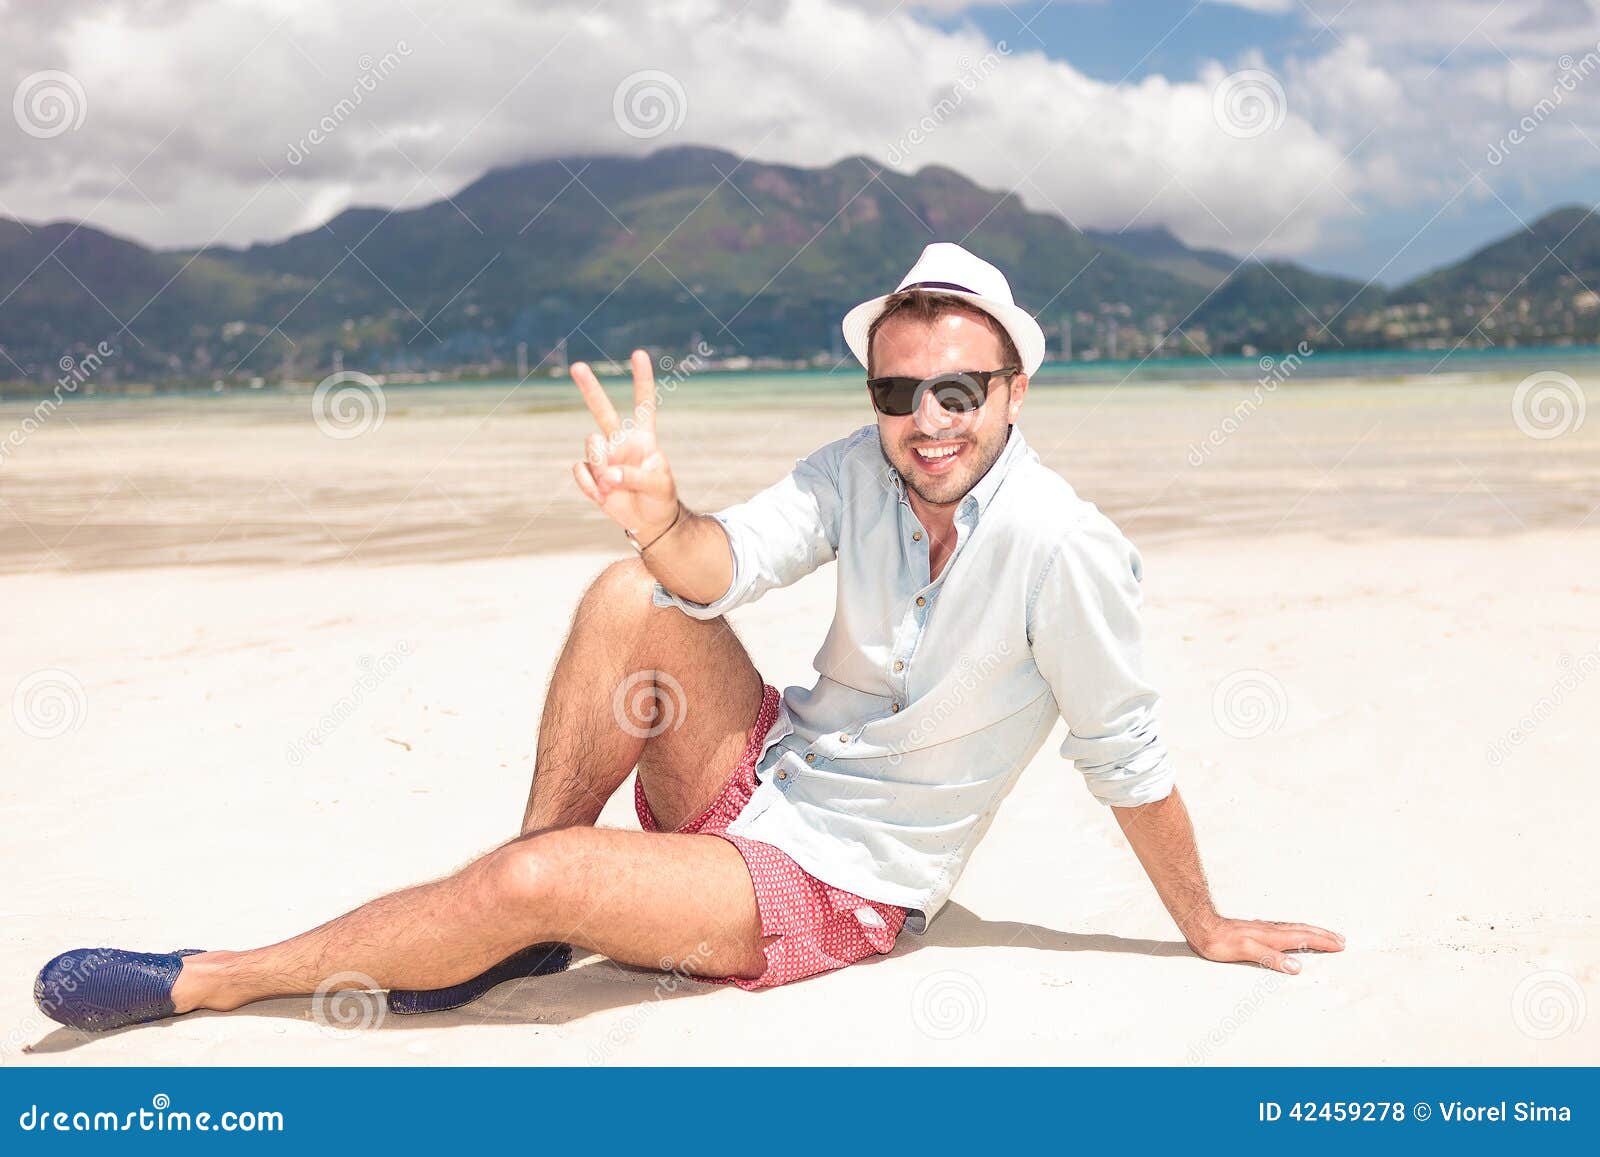 Man Making the Victory Peace Sign on the Beach Stock Photo - Image of ...